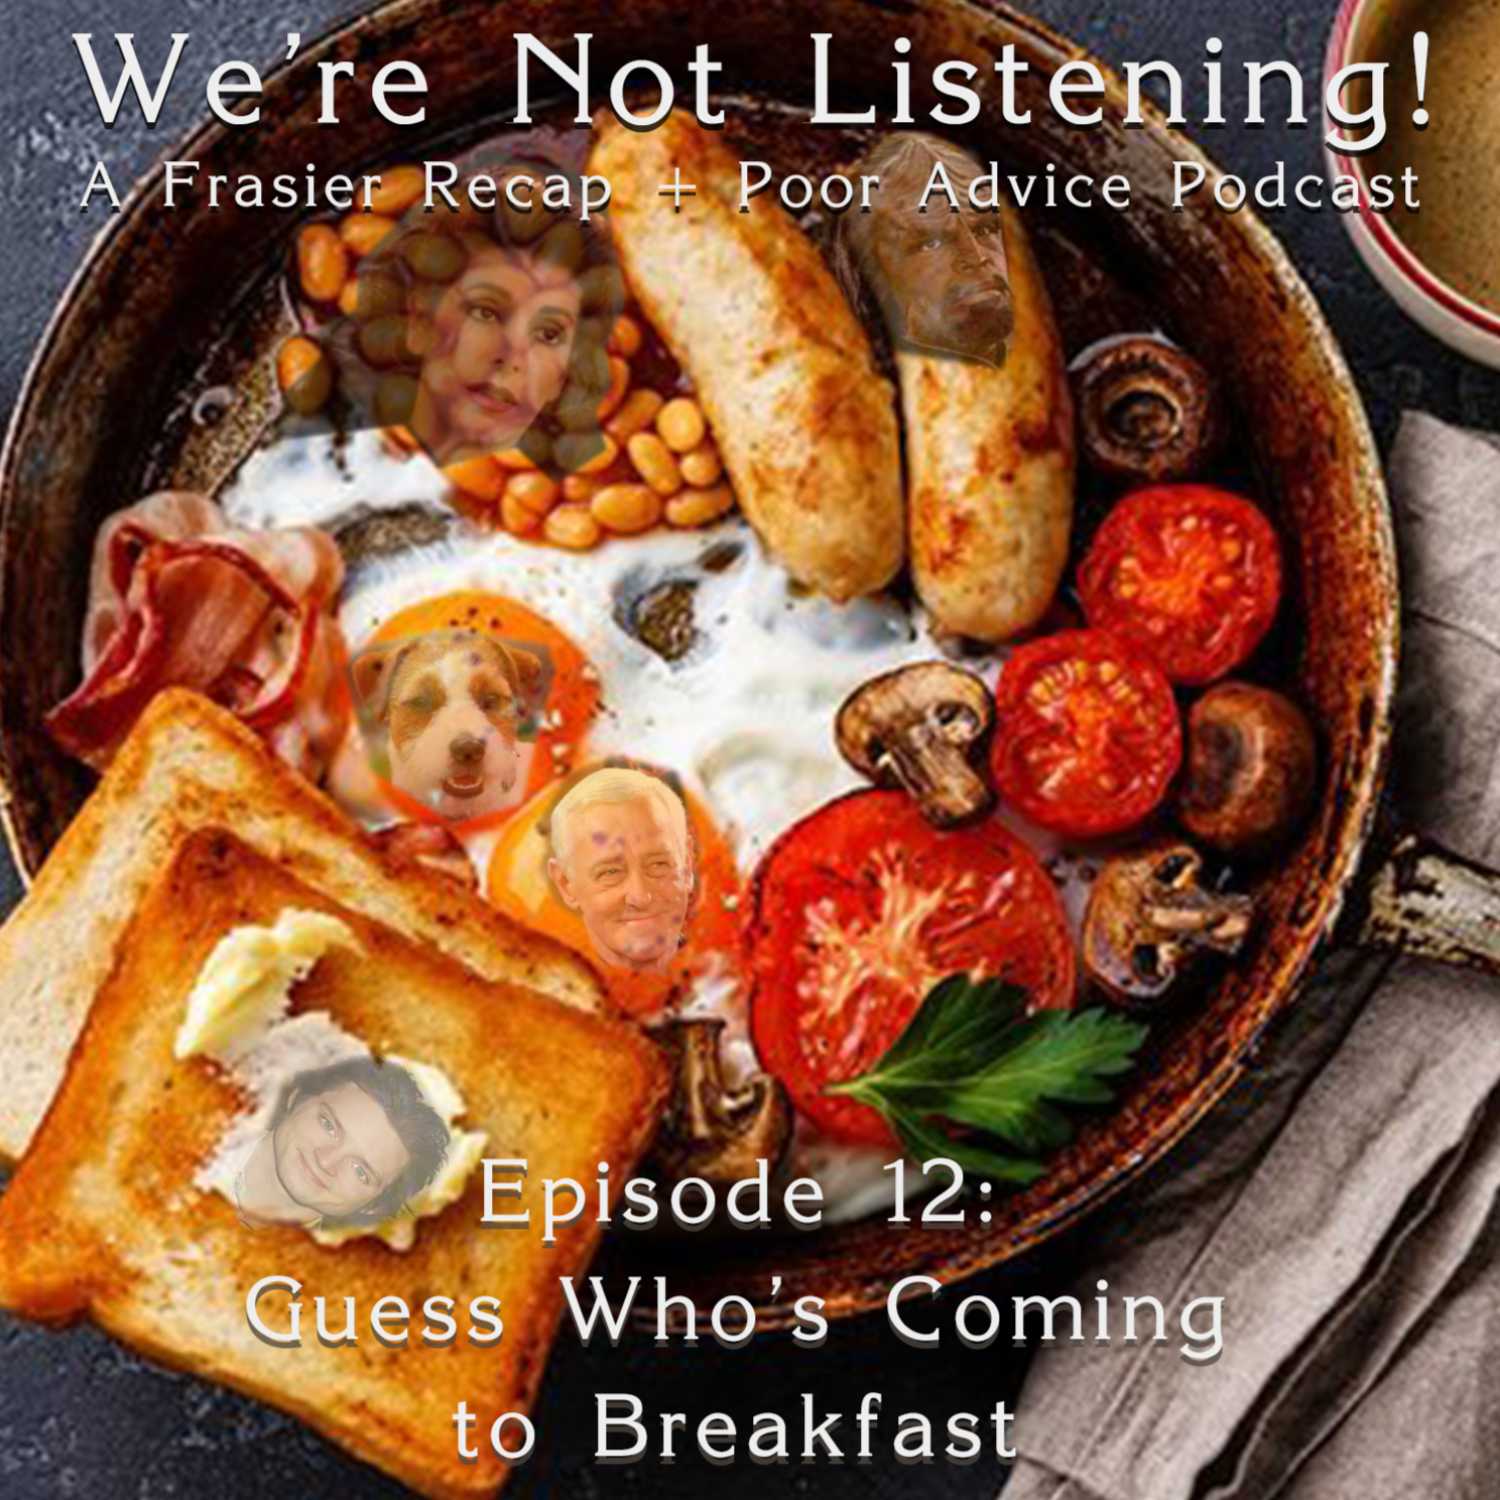 Episode Twelve: Guess Who's Coming to Breakfast